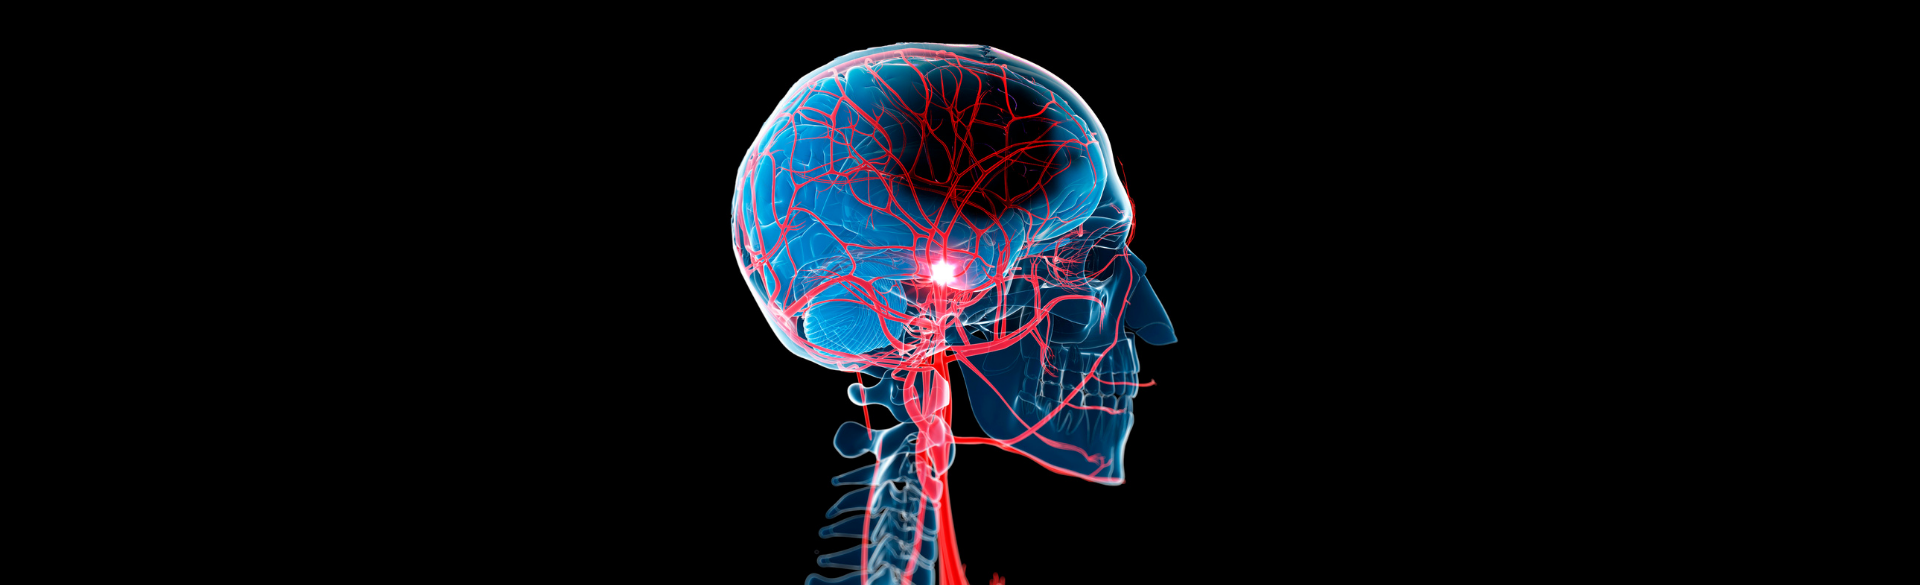 In adults 35 and younger, women are 44% more likely than men to suffer ischemic strokes — strokes caused by blood clots that travel to the brain.